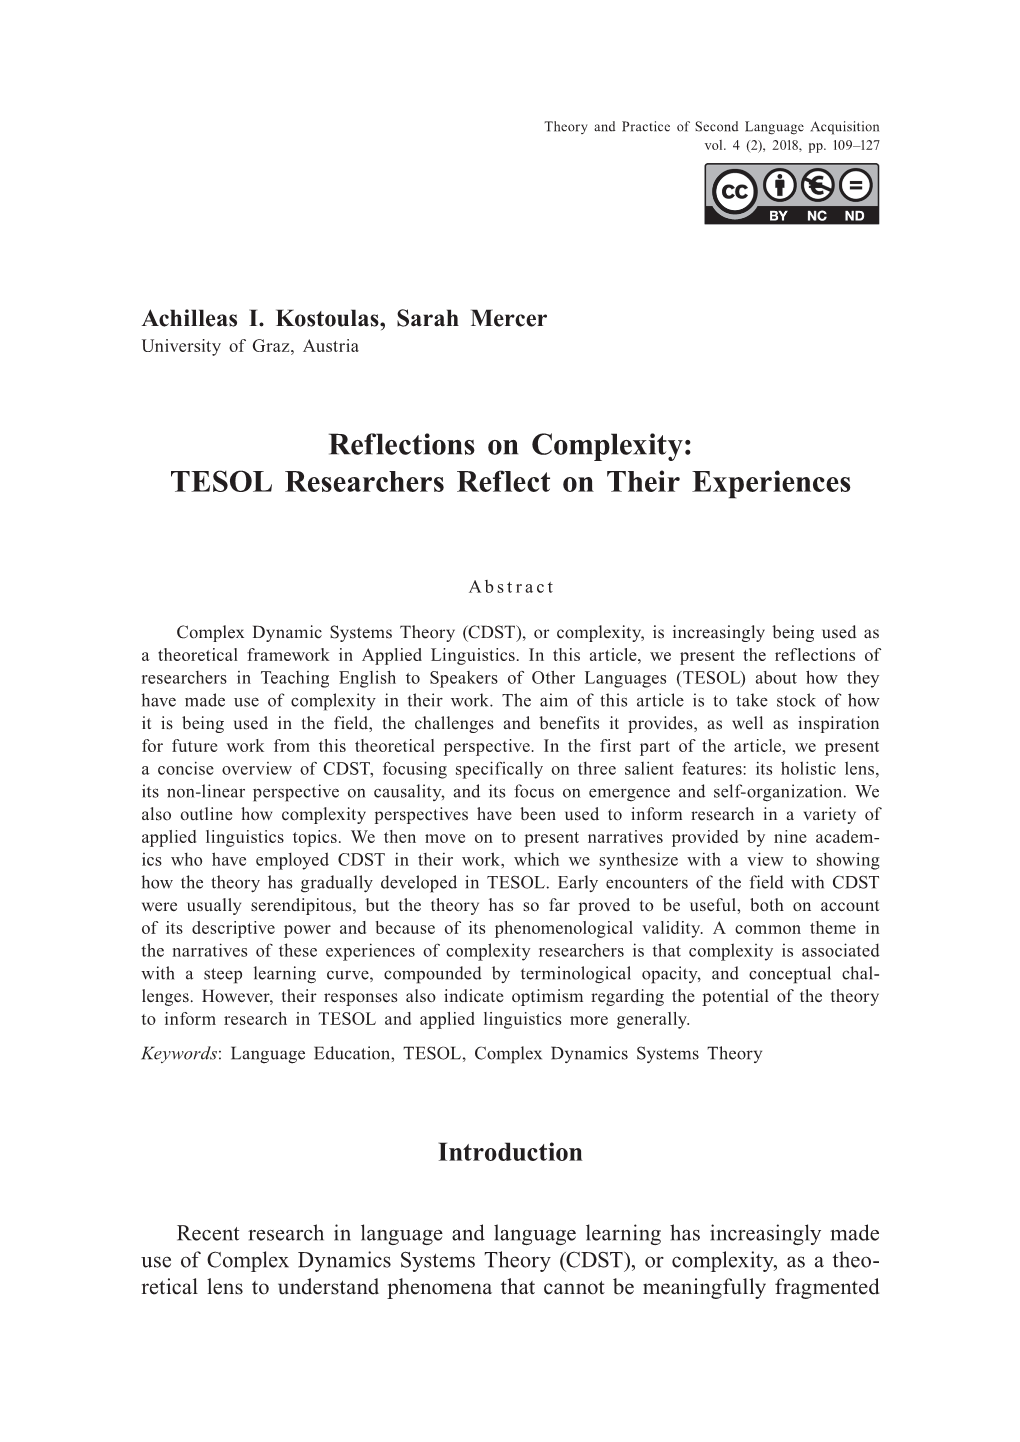 Reflections on Complexity: TESOL Researchers Reflect on Their Experiences